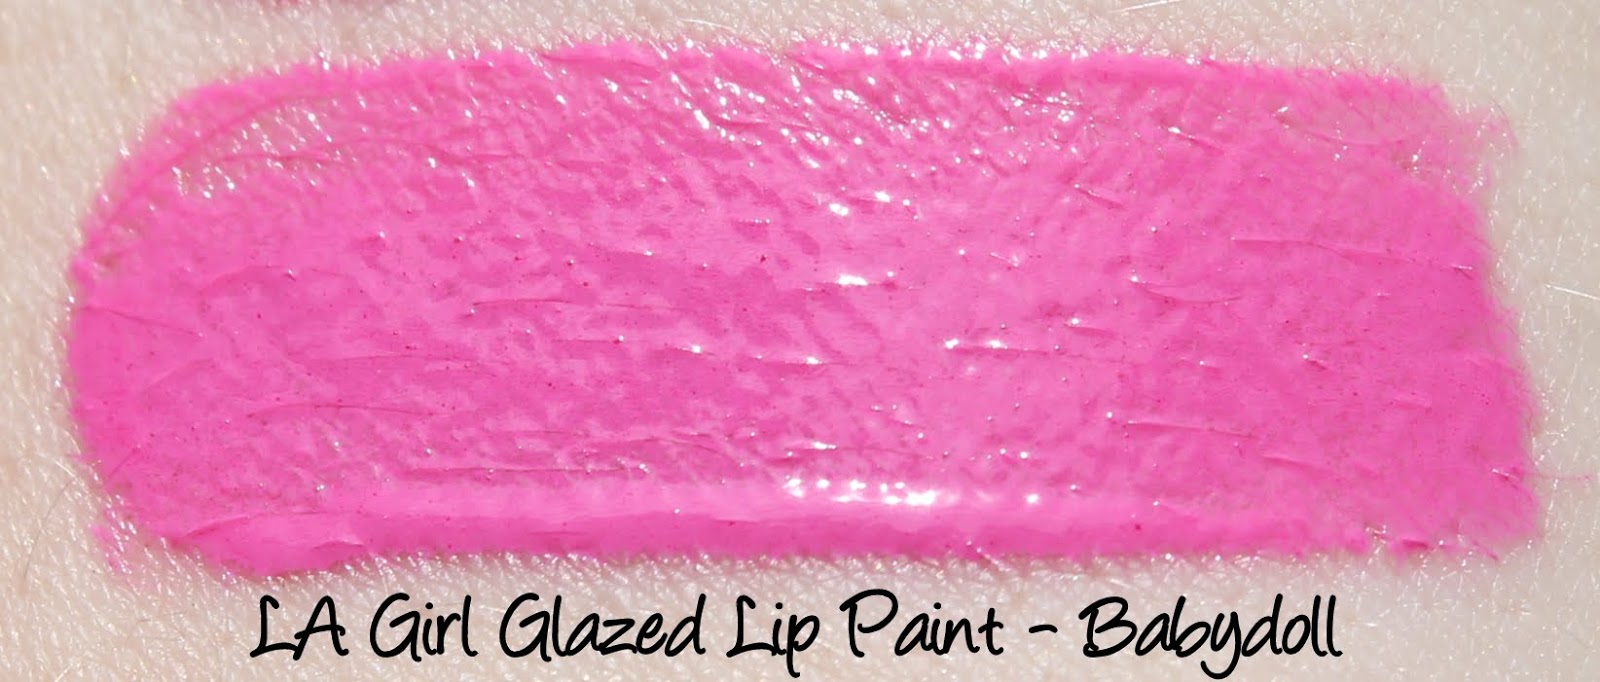 LA Girl Glazed Lip Paints - Babydoll Swatches & Review